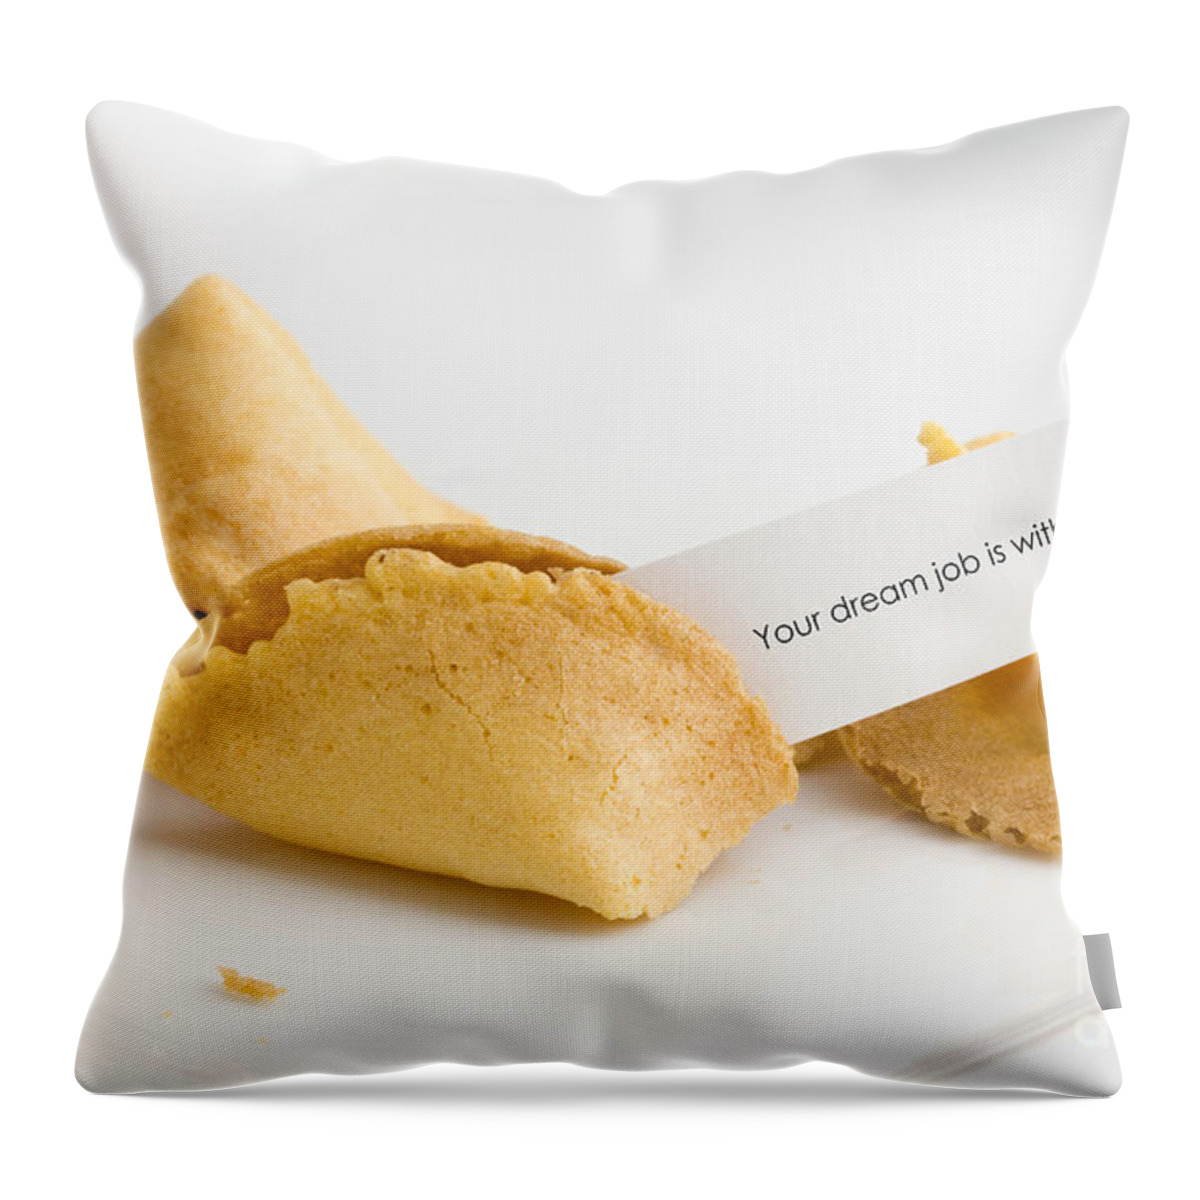 Fortune Cookie Throw Pillow featuring the photograph Dream Job by Patty Colabuono